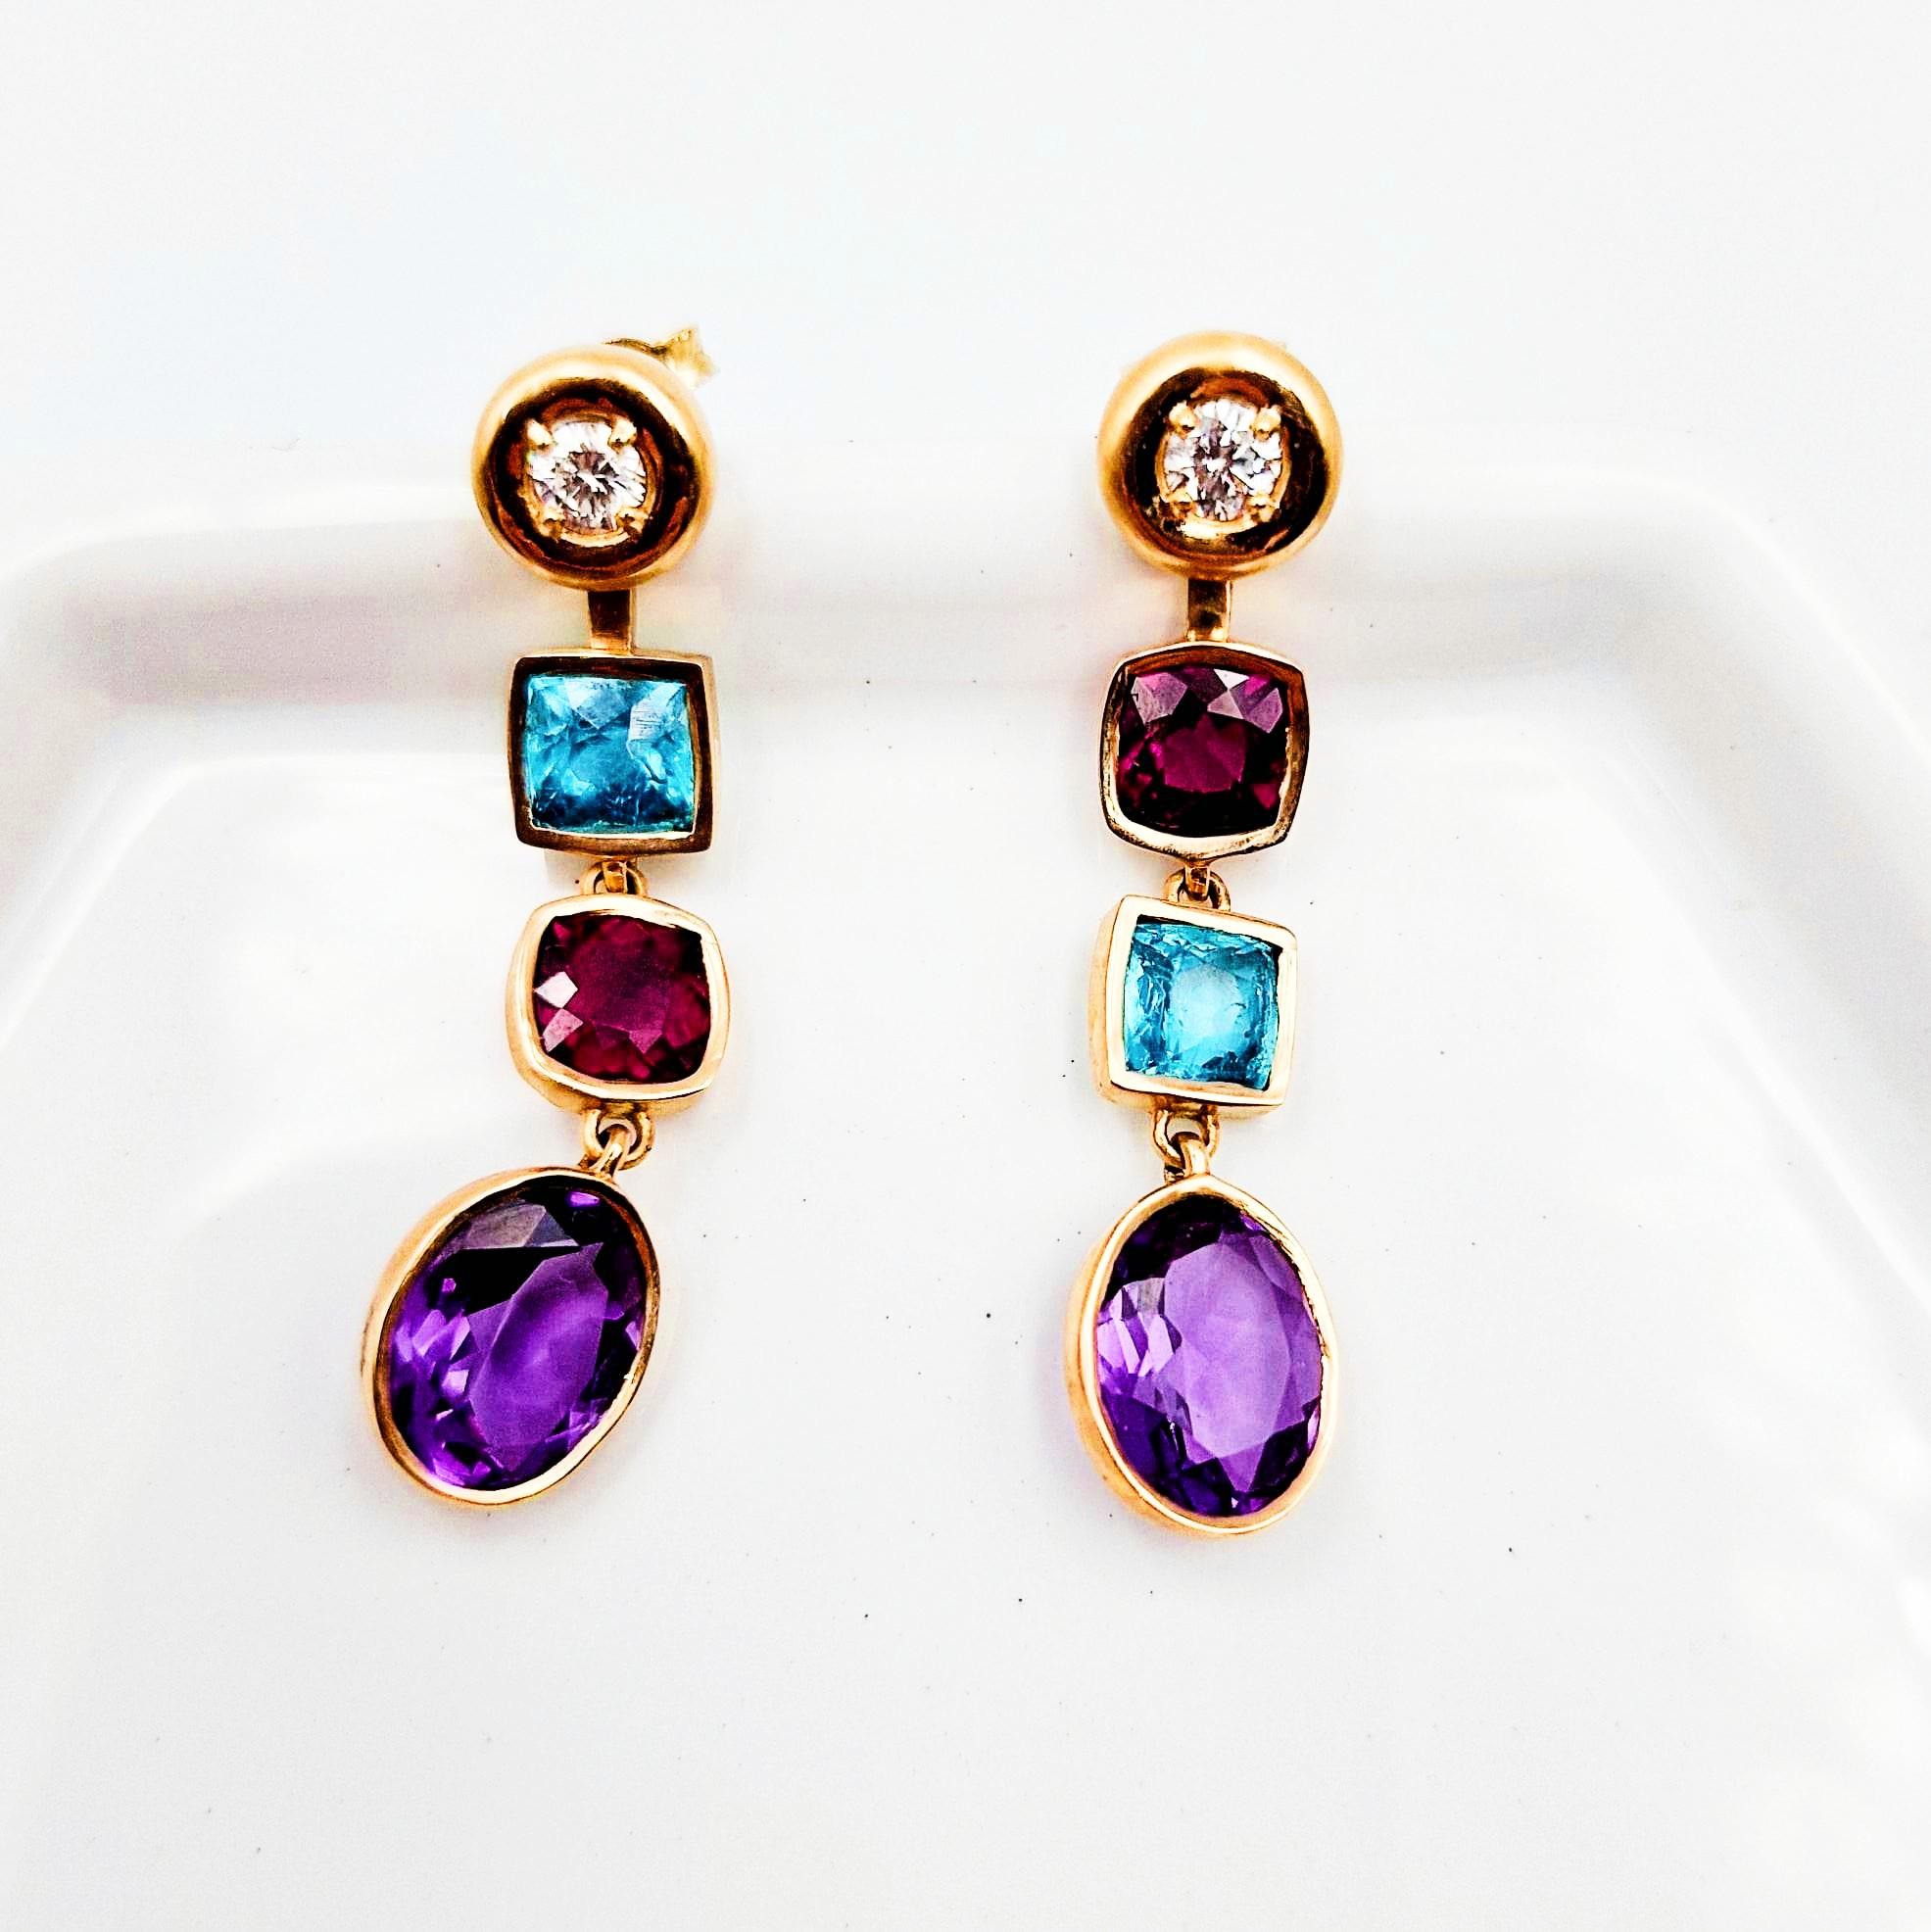 Contemporary Modular Gold Diamond Studs with Apatite, Amethyst and Garnets For Sale